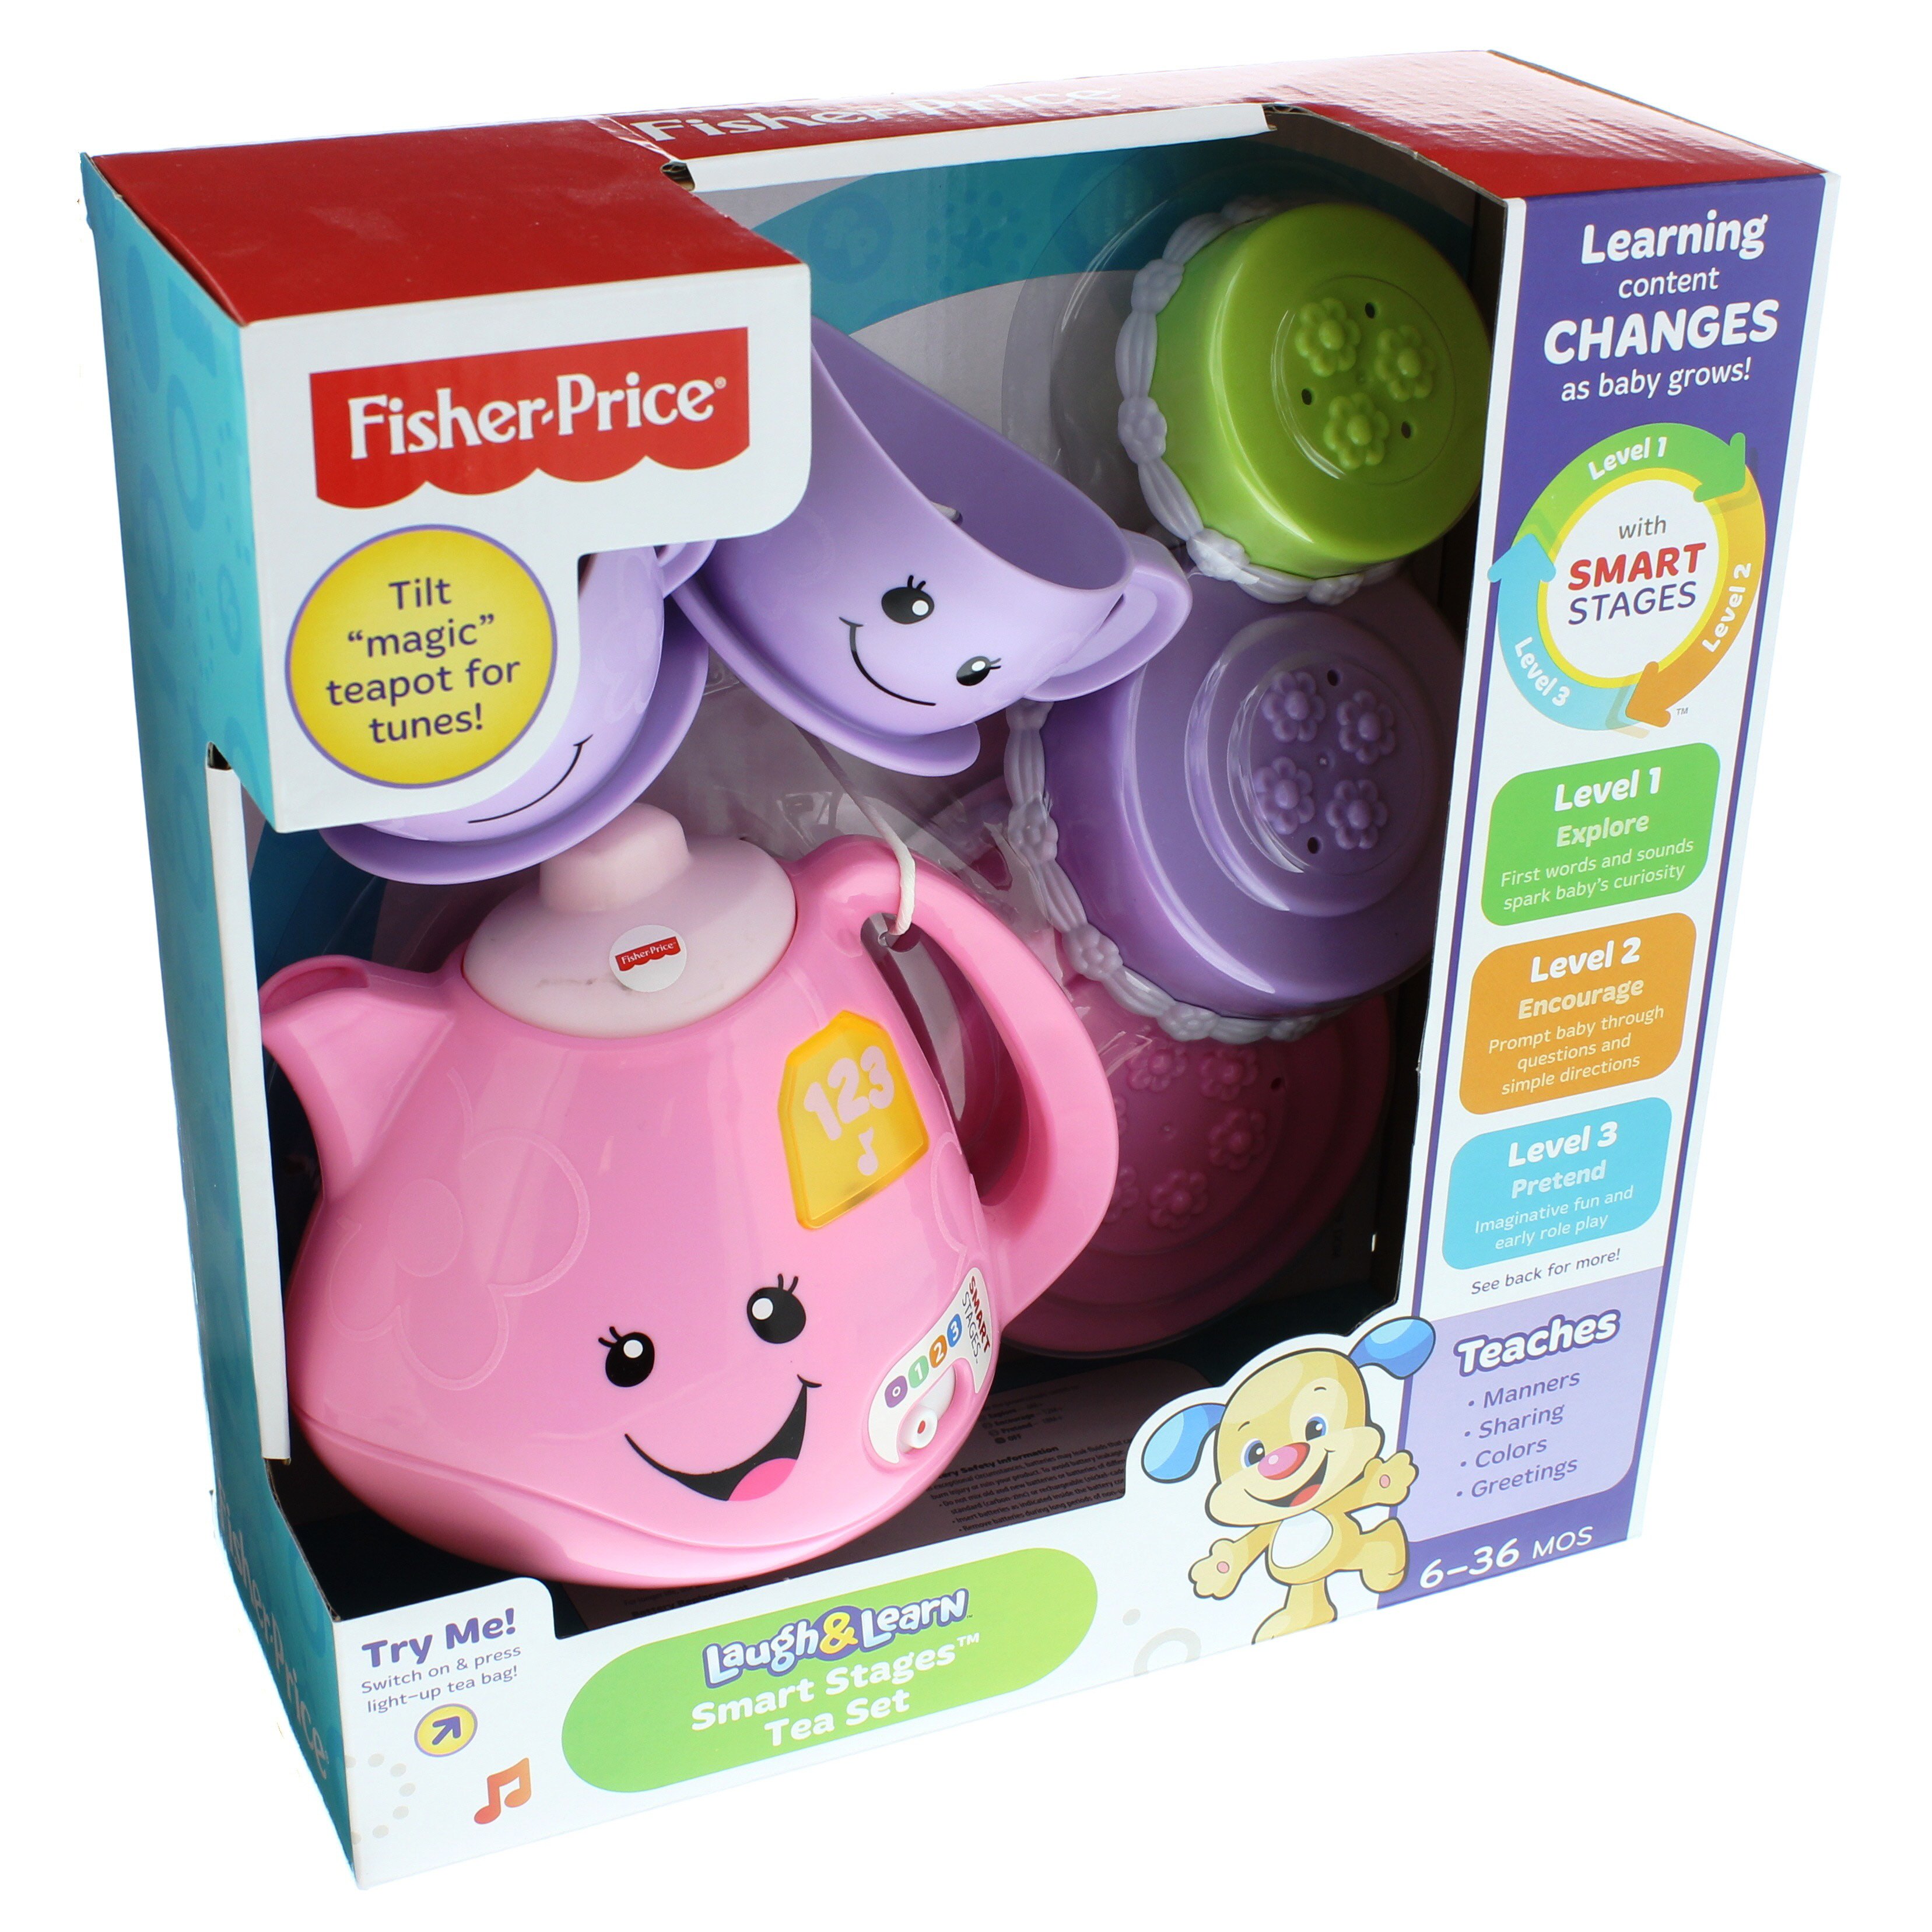 fisher price learning content changes